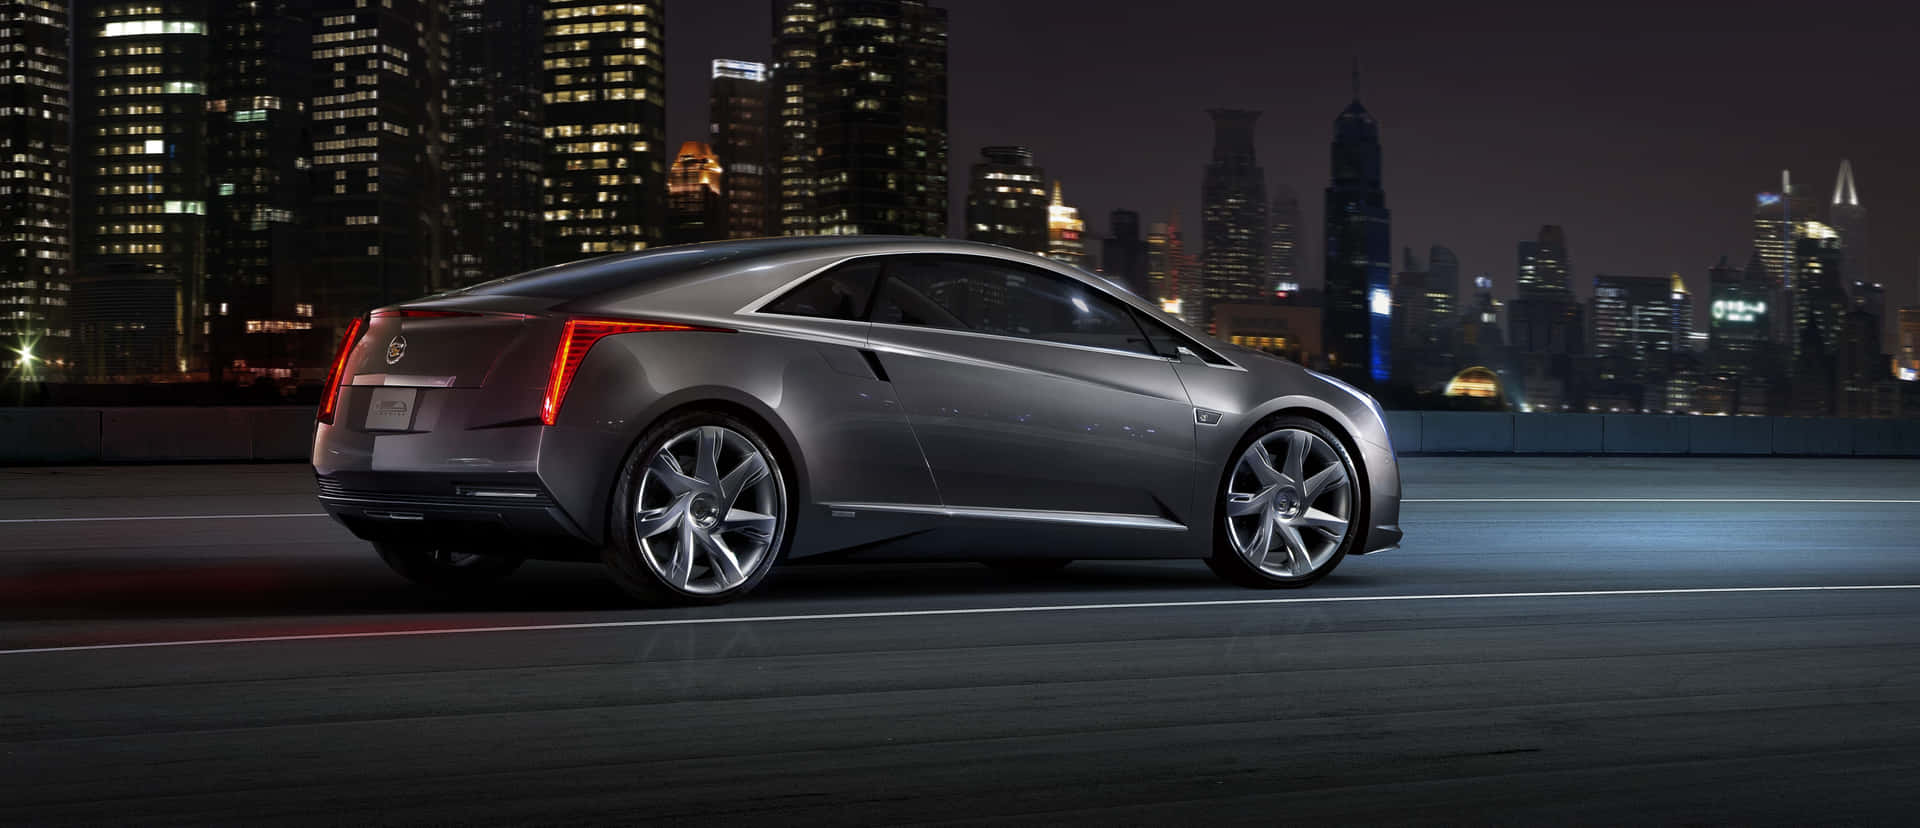 Sleek and Stylish Cadillac ELR Parked Outdoors Wallpaper